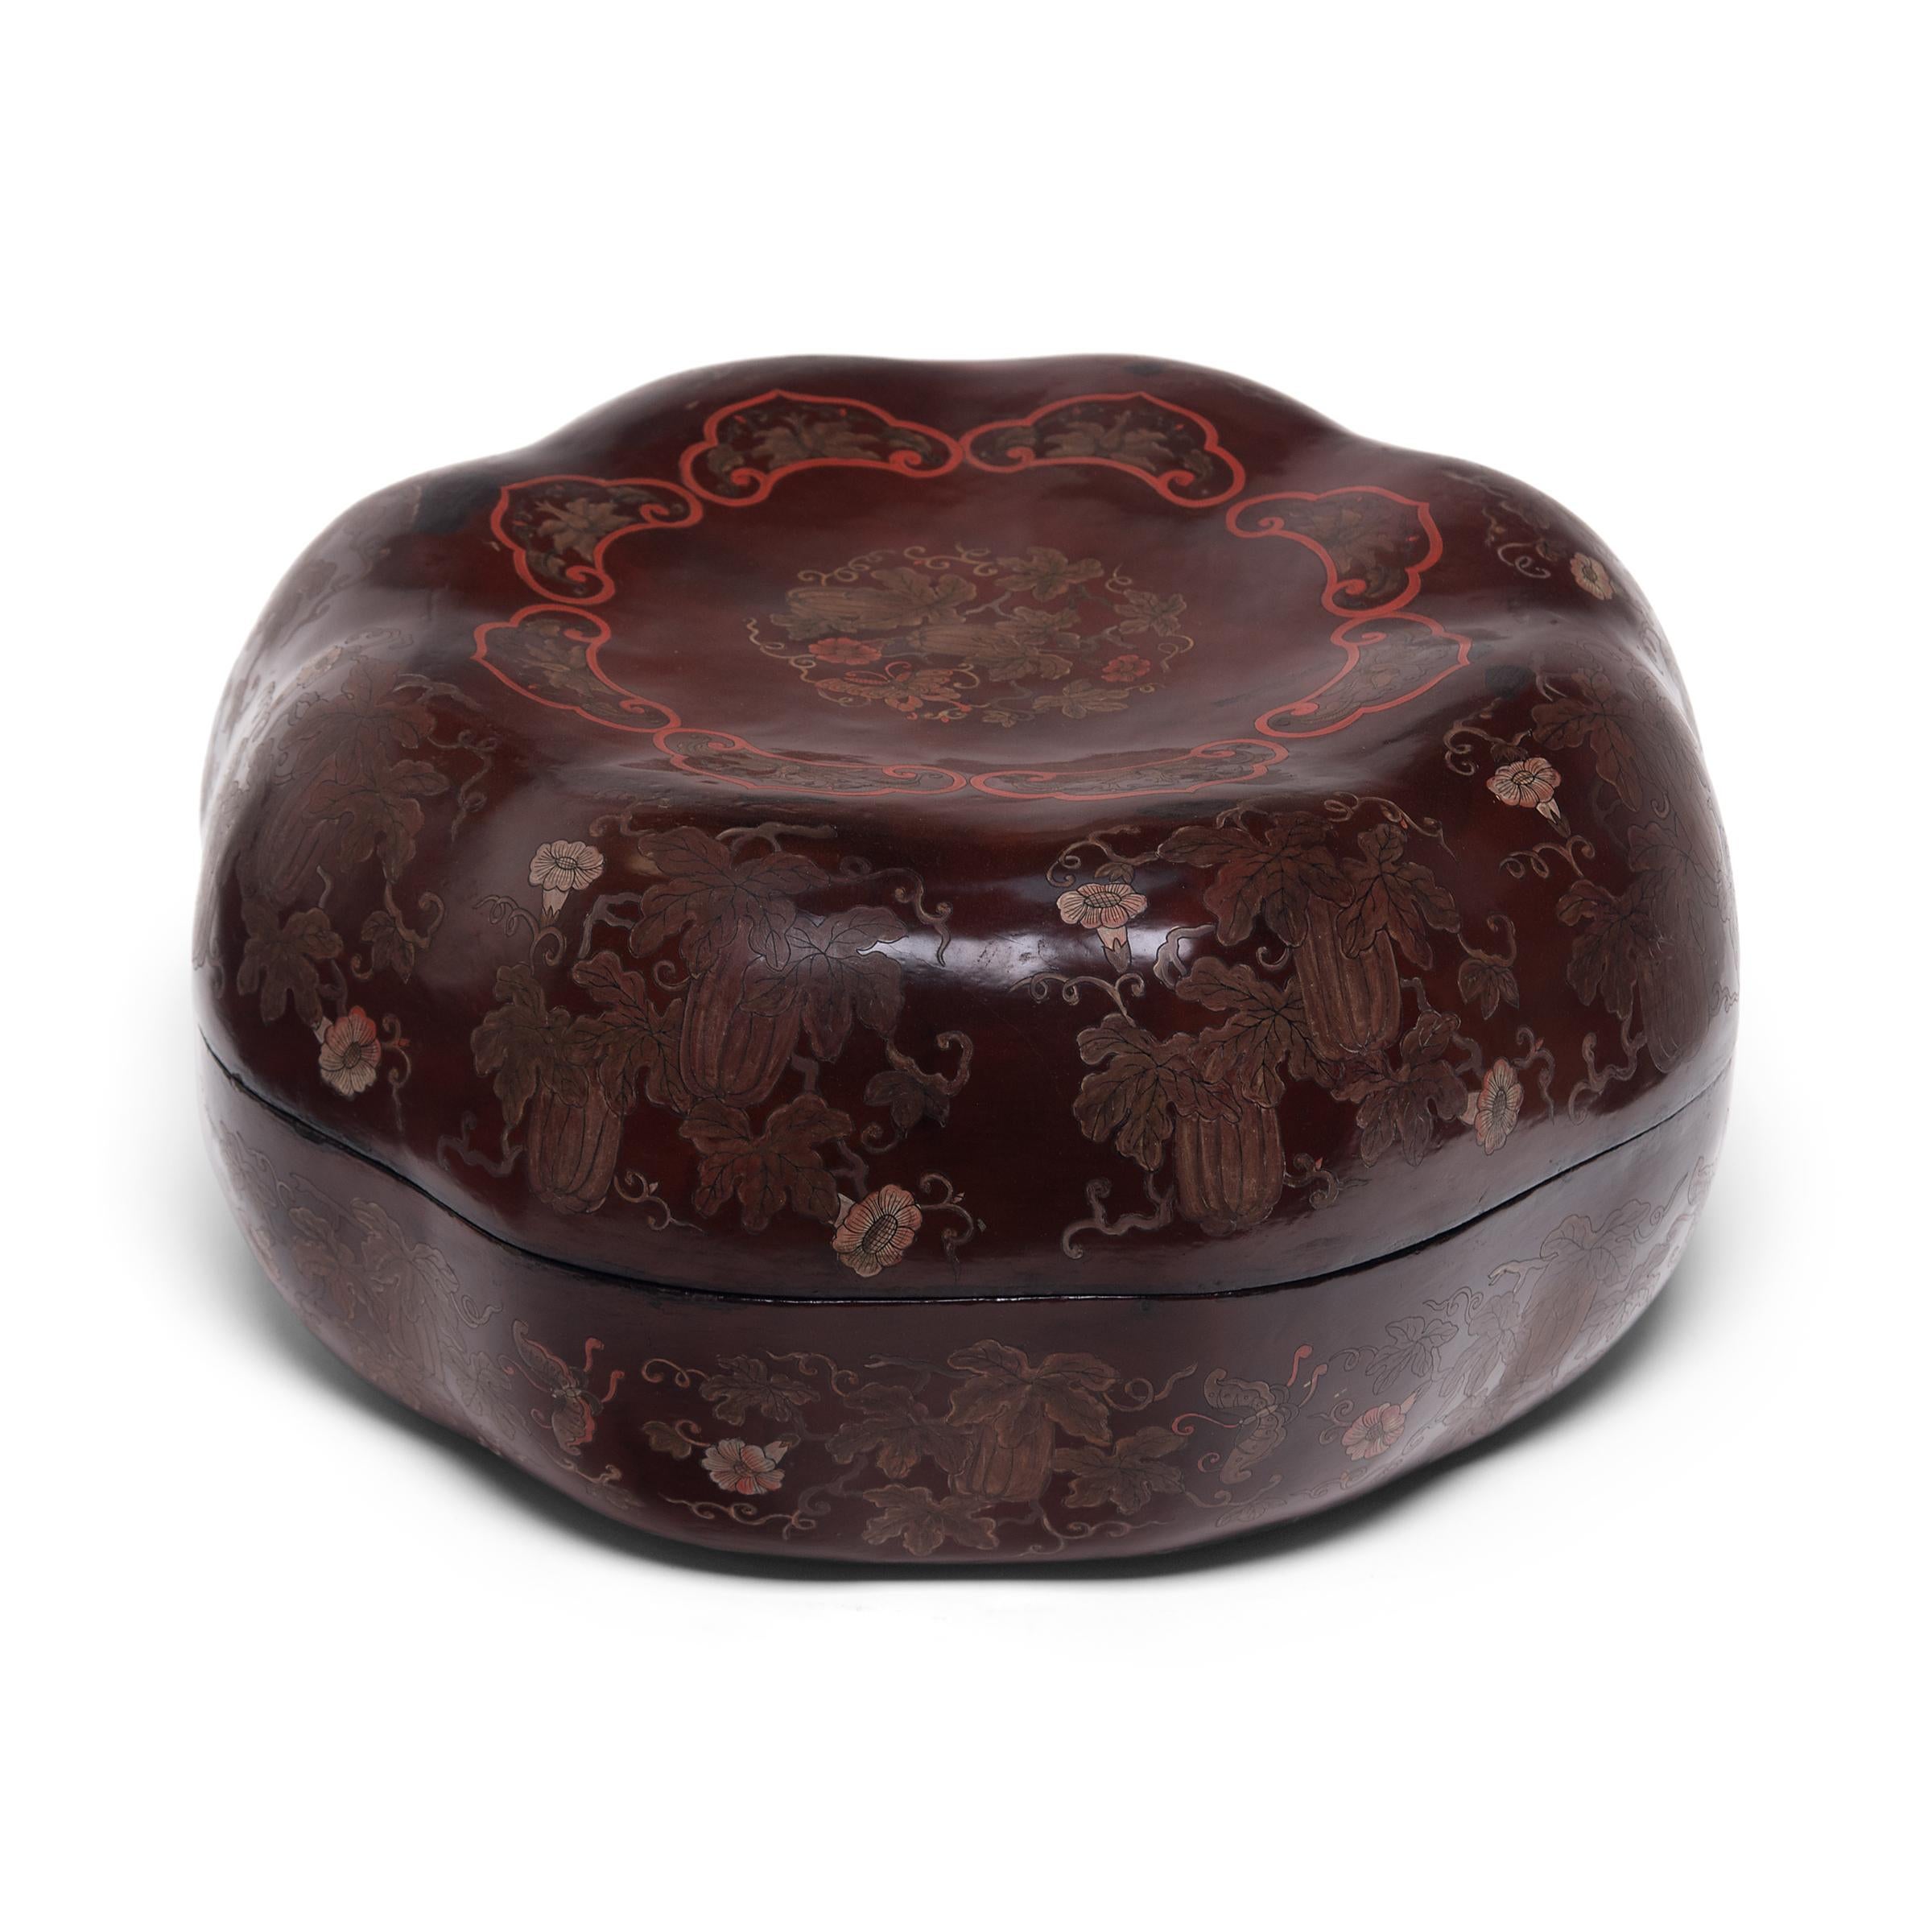 This finely lacquered box was once presented as a gift, filled with popular snacks like roasted melon seeds, dried fruit, and cinnamon-toasted soy beans. The lightweight box is formed in the shape of a melon, a traditional symbol of perpetuity.